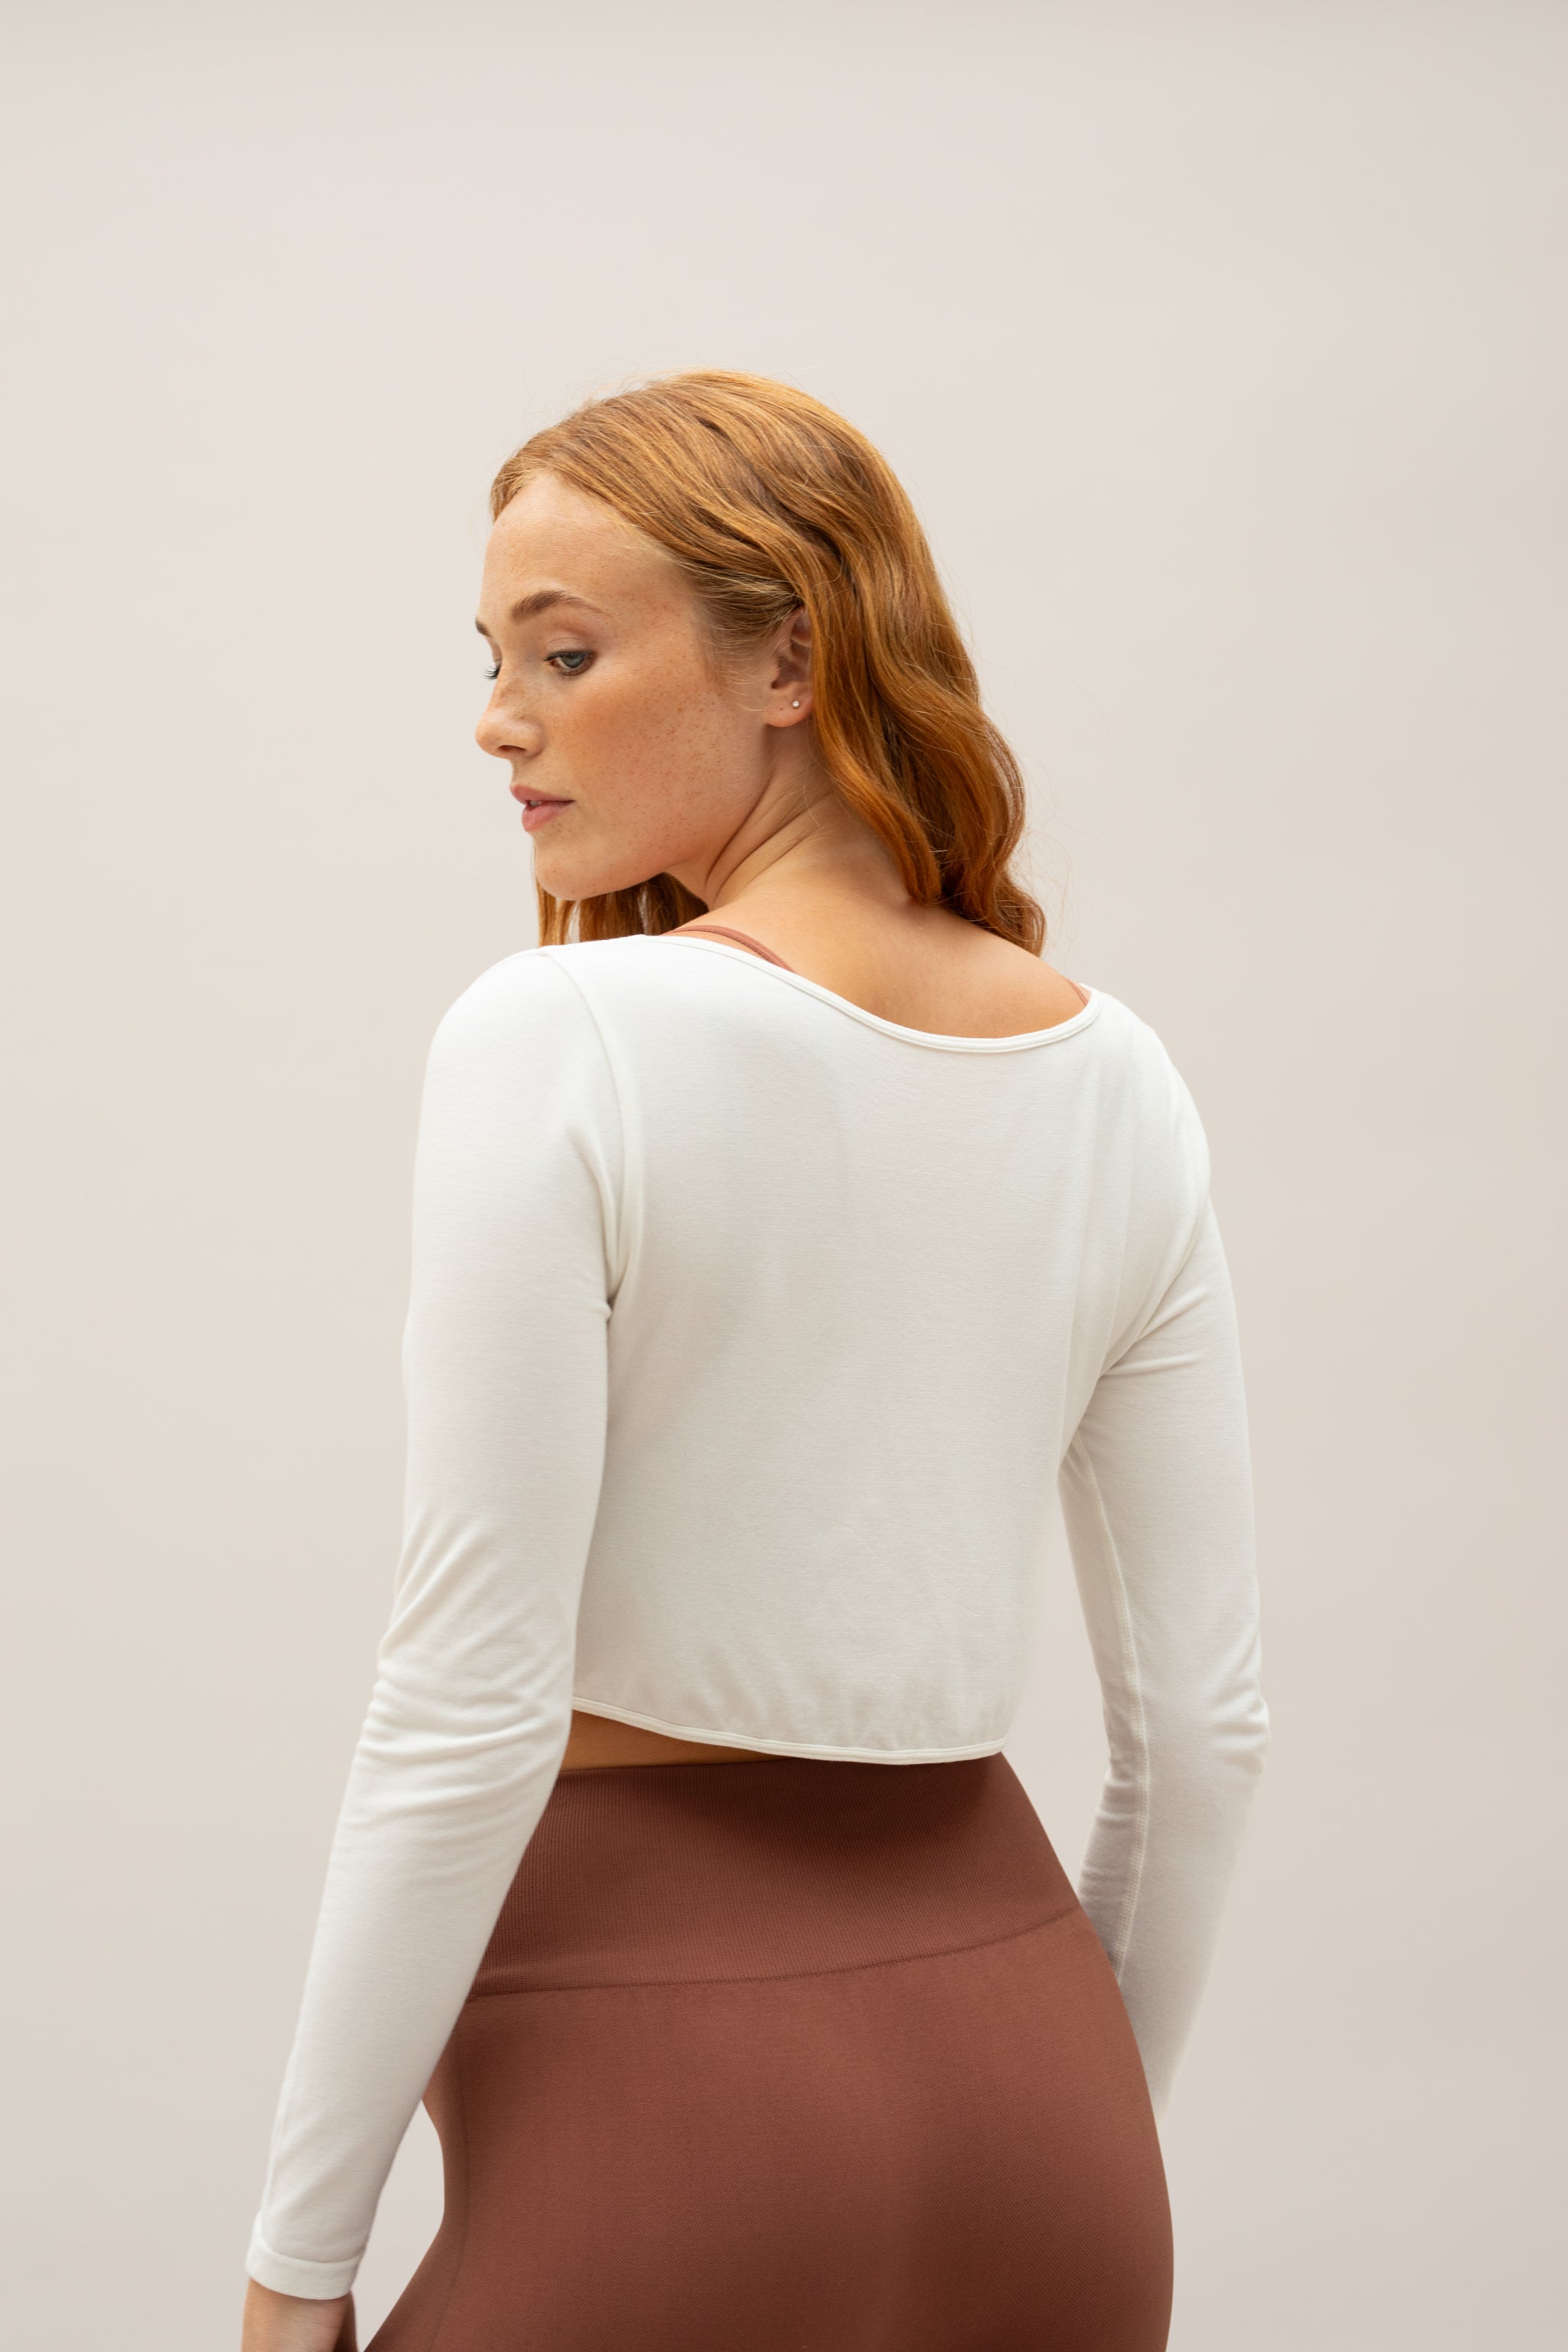 White cropped long sleeve white twisted front top with brown high waist leggings by sustainable women's activewear brand, Jilla. 